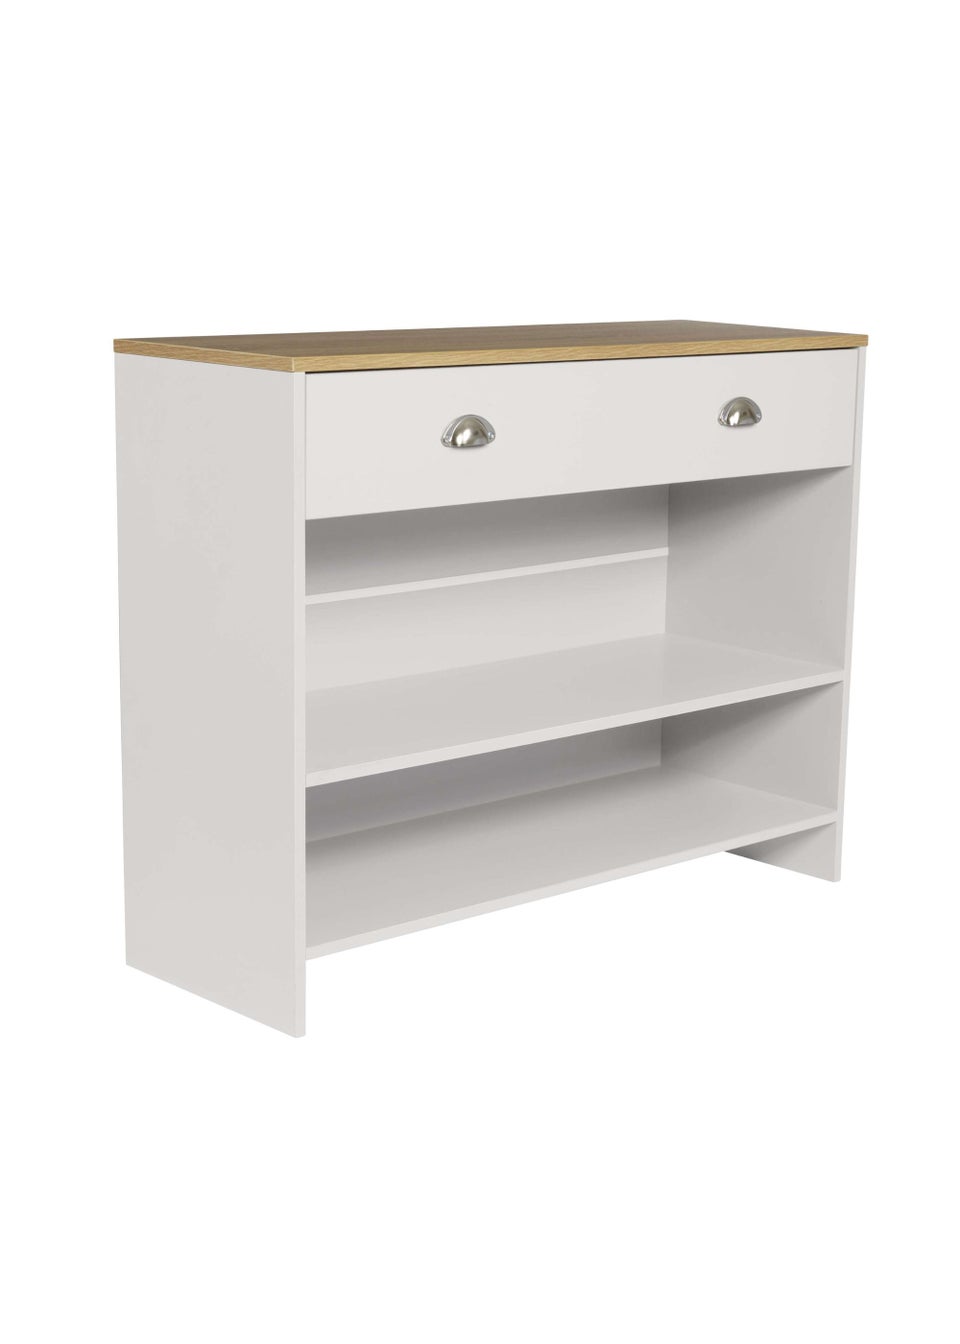 Lloyd Pascal Linwood Console with 2 shelves Cream